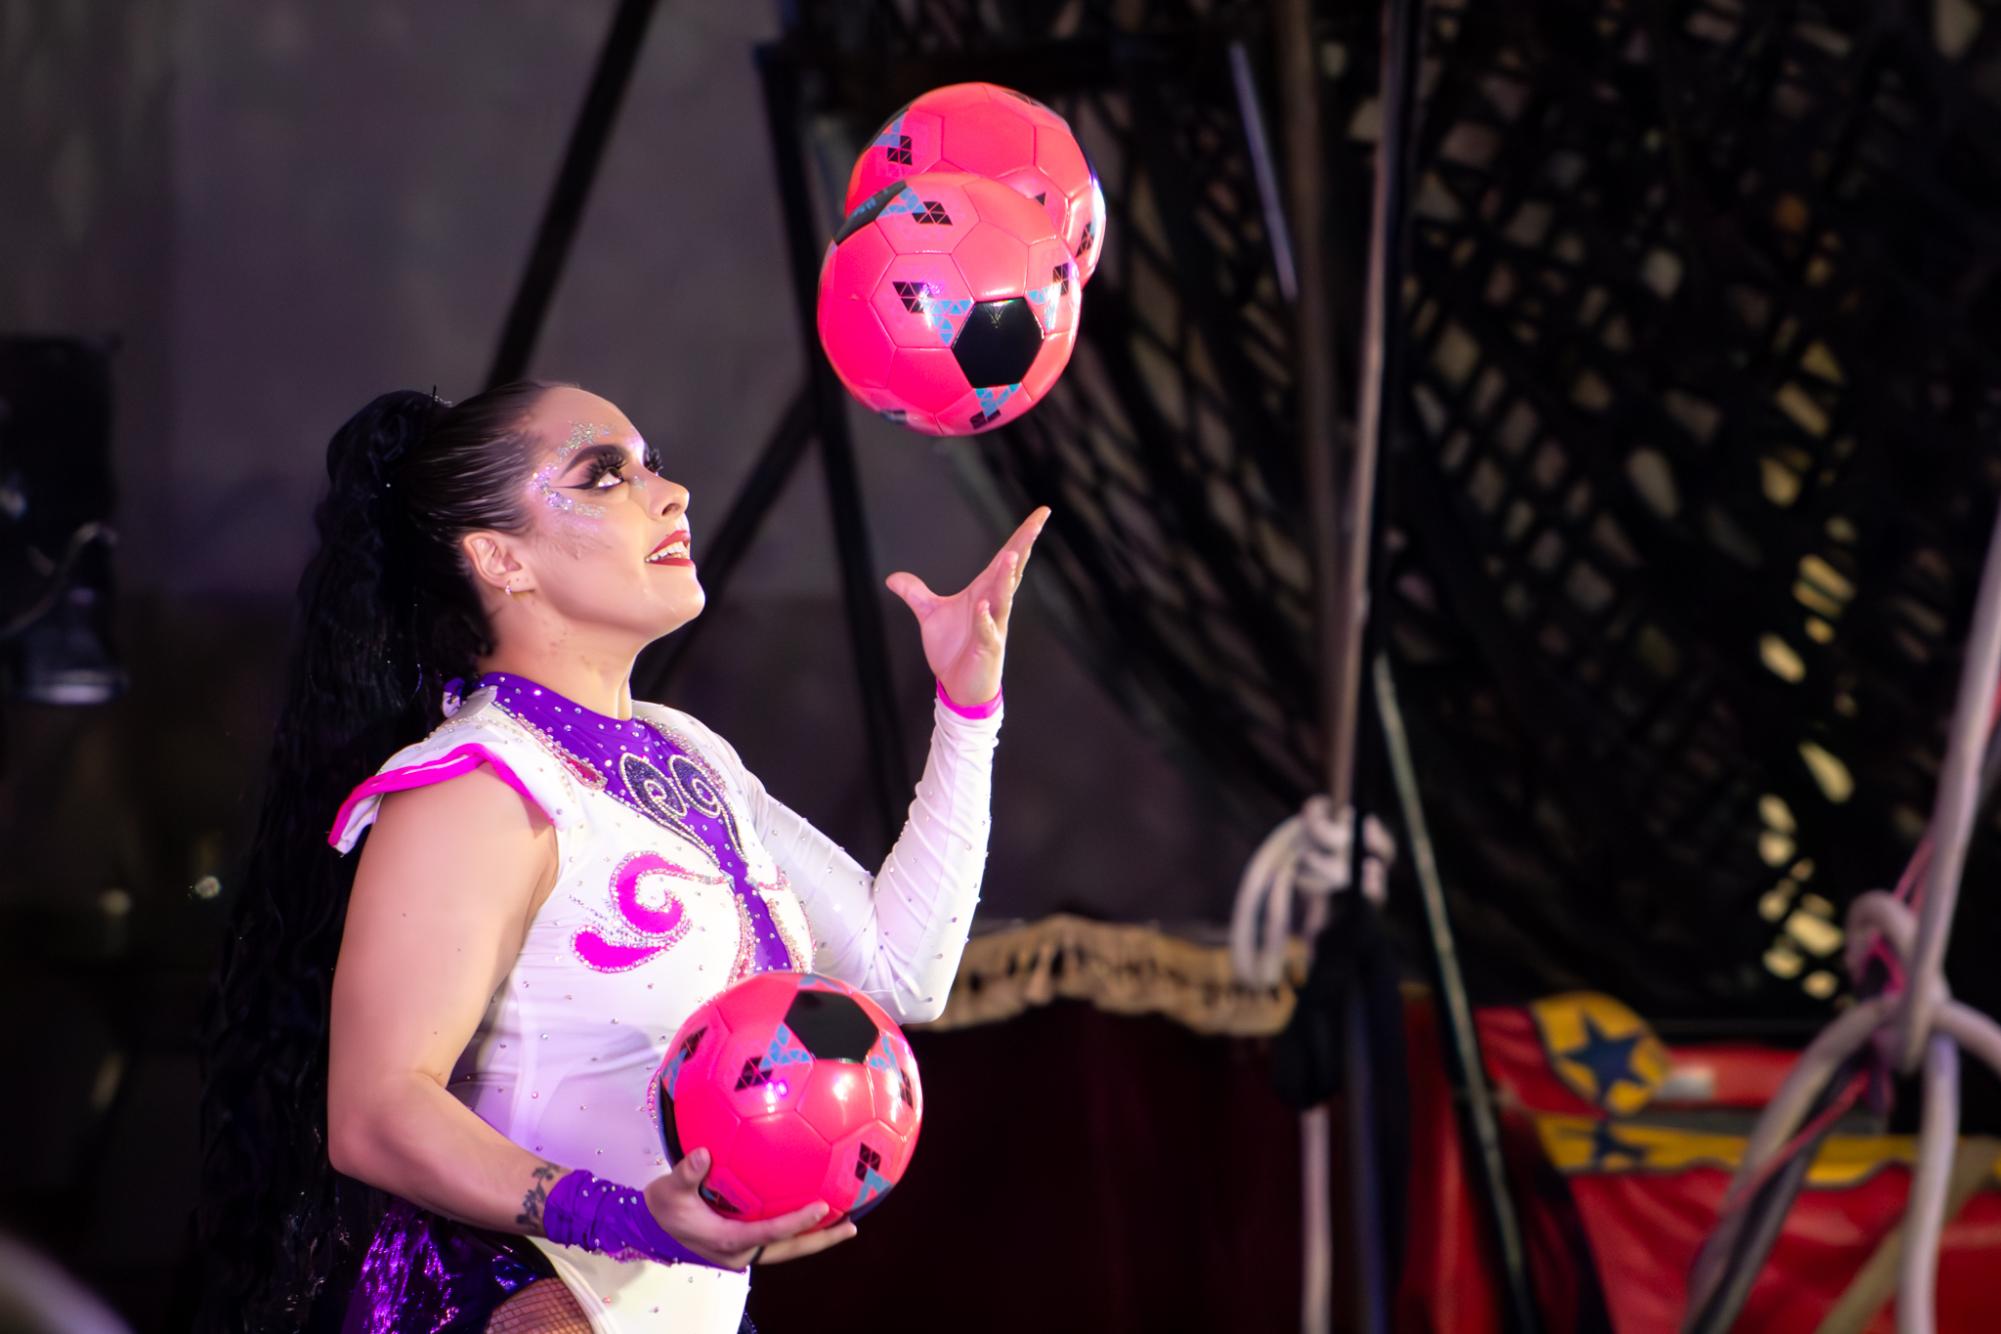 Members of the Rosales family juggled various items at the circus.